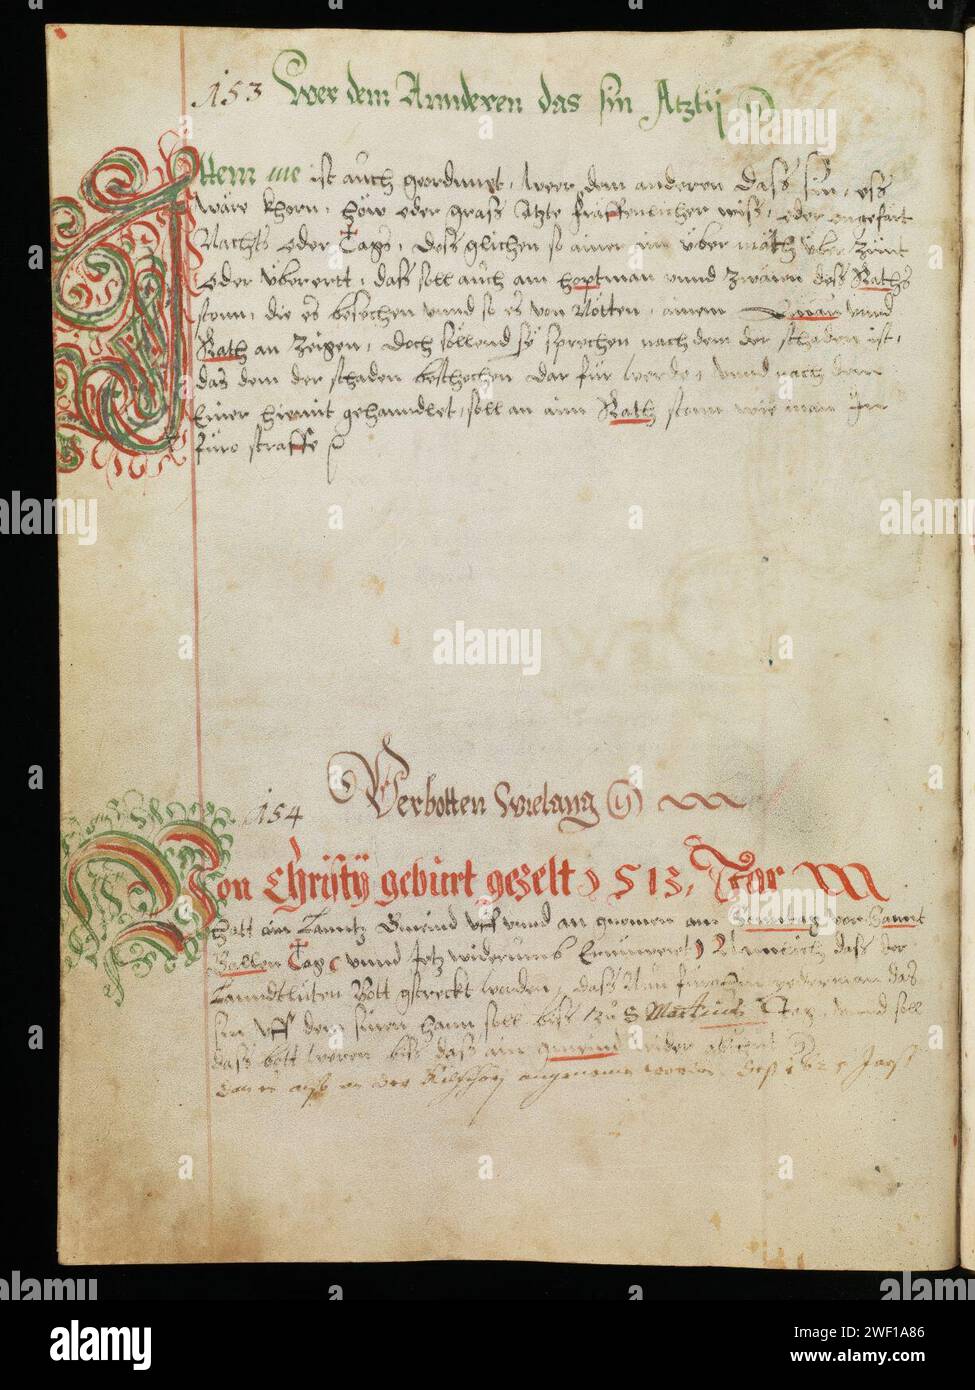 Appenzell, Landesarchiv Appenzell Innerrhoden, E.10.02.01.01, f. 47v – Silver Book of the Land. Stock Photo